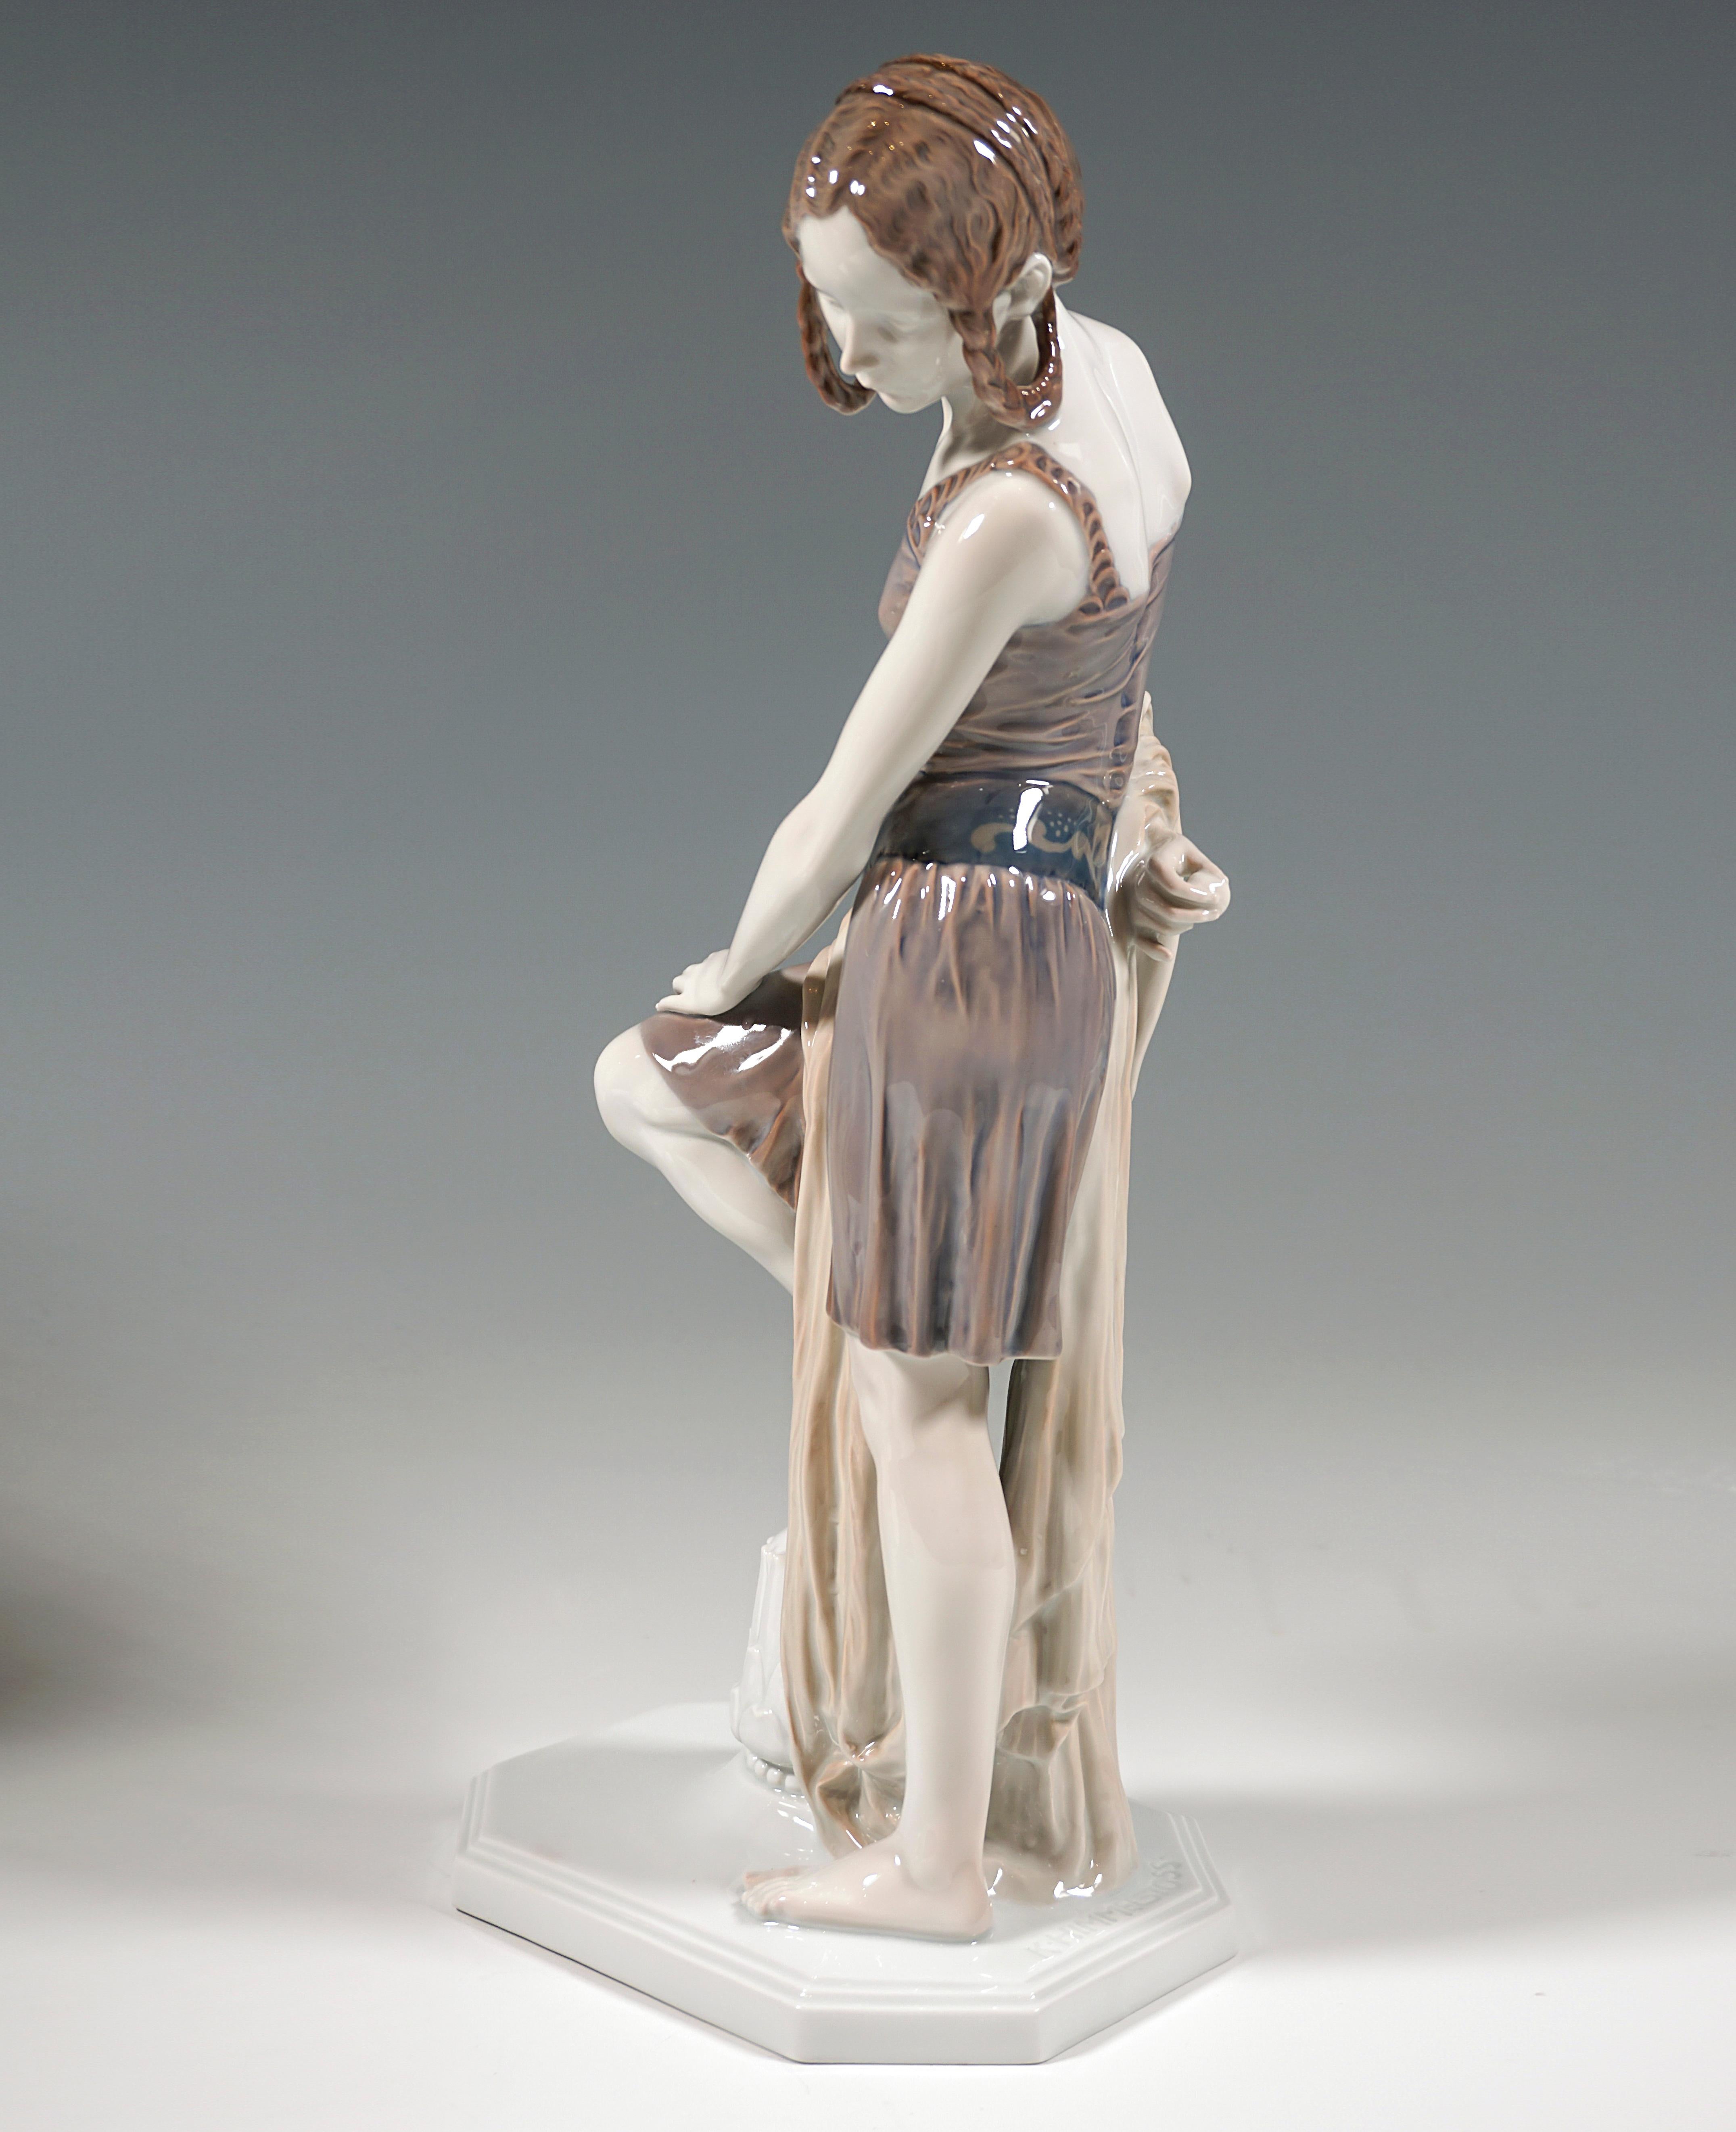 Excellent rare Rosenthal figurine of the 1920s:
Young woman in short strap dress with artfully braided and pinned up hair and 
ornamented belly band, head turned to the left and looking to the ground, and 
a long scarf reaching to the ground around